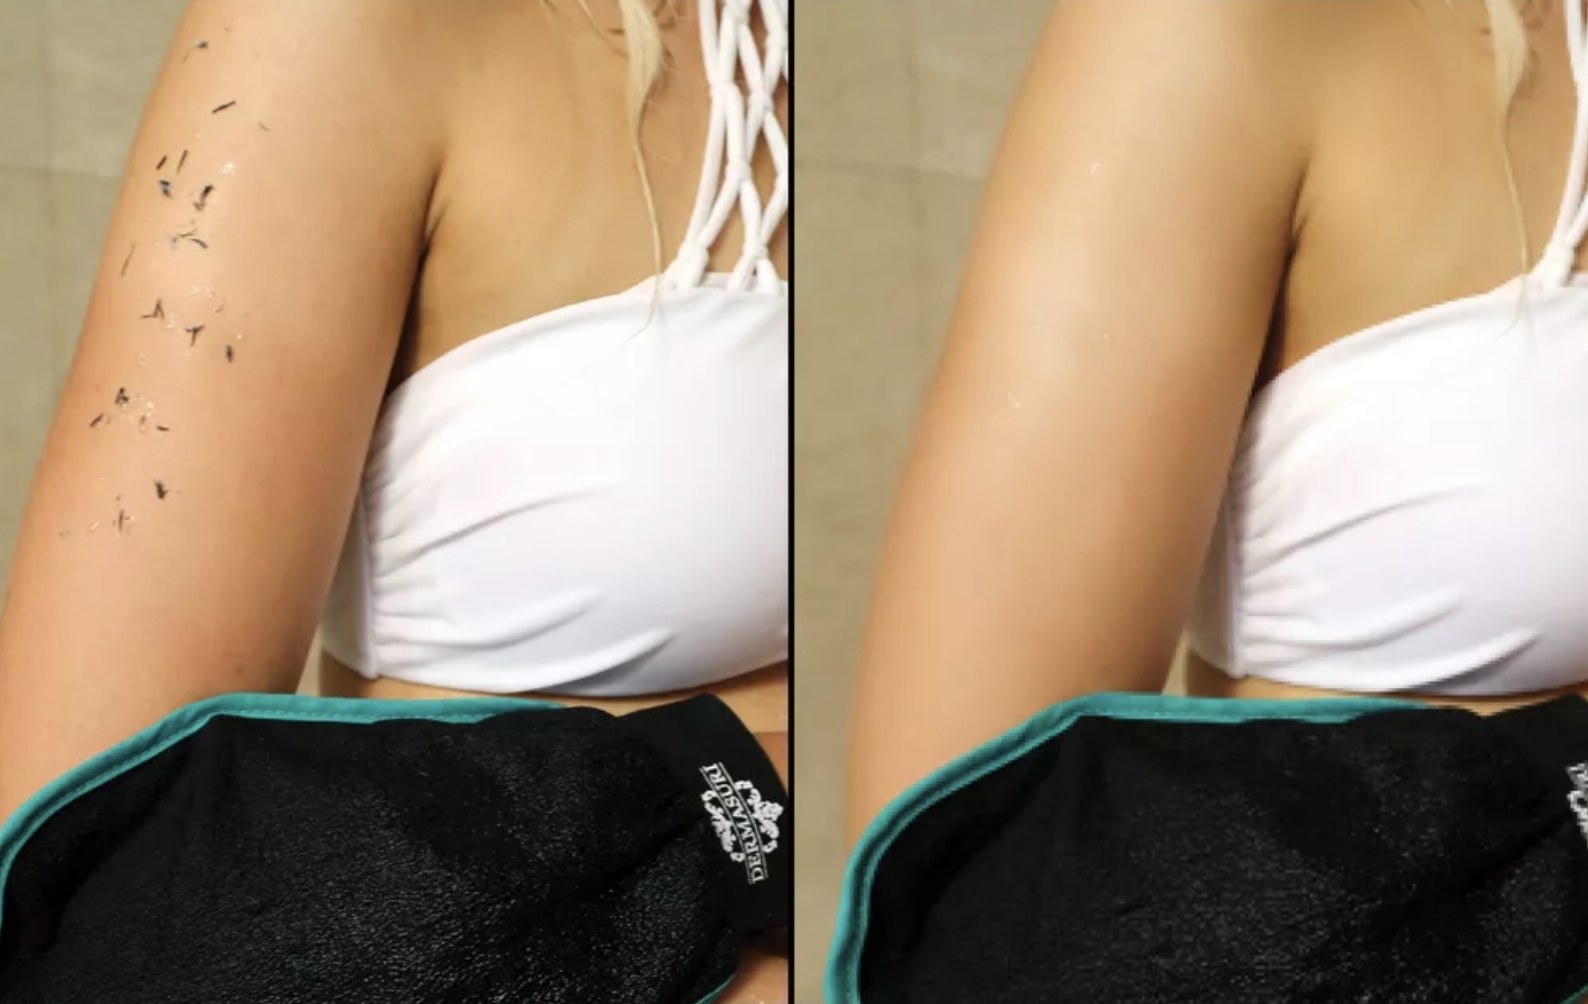 model using exfoliating glove on her arm on left and model after exfoliating on right